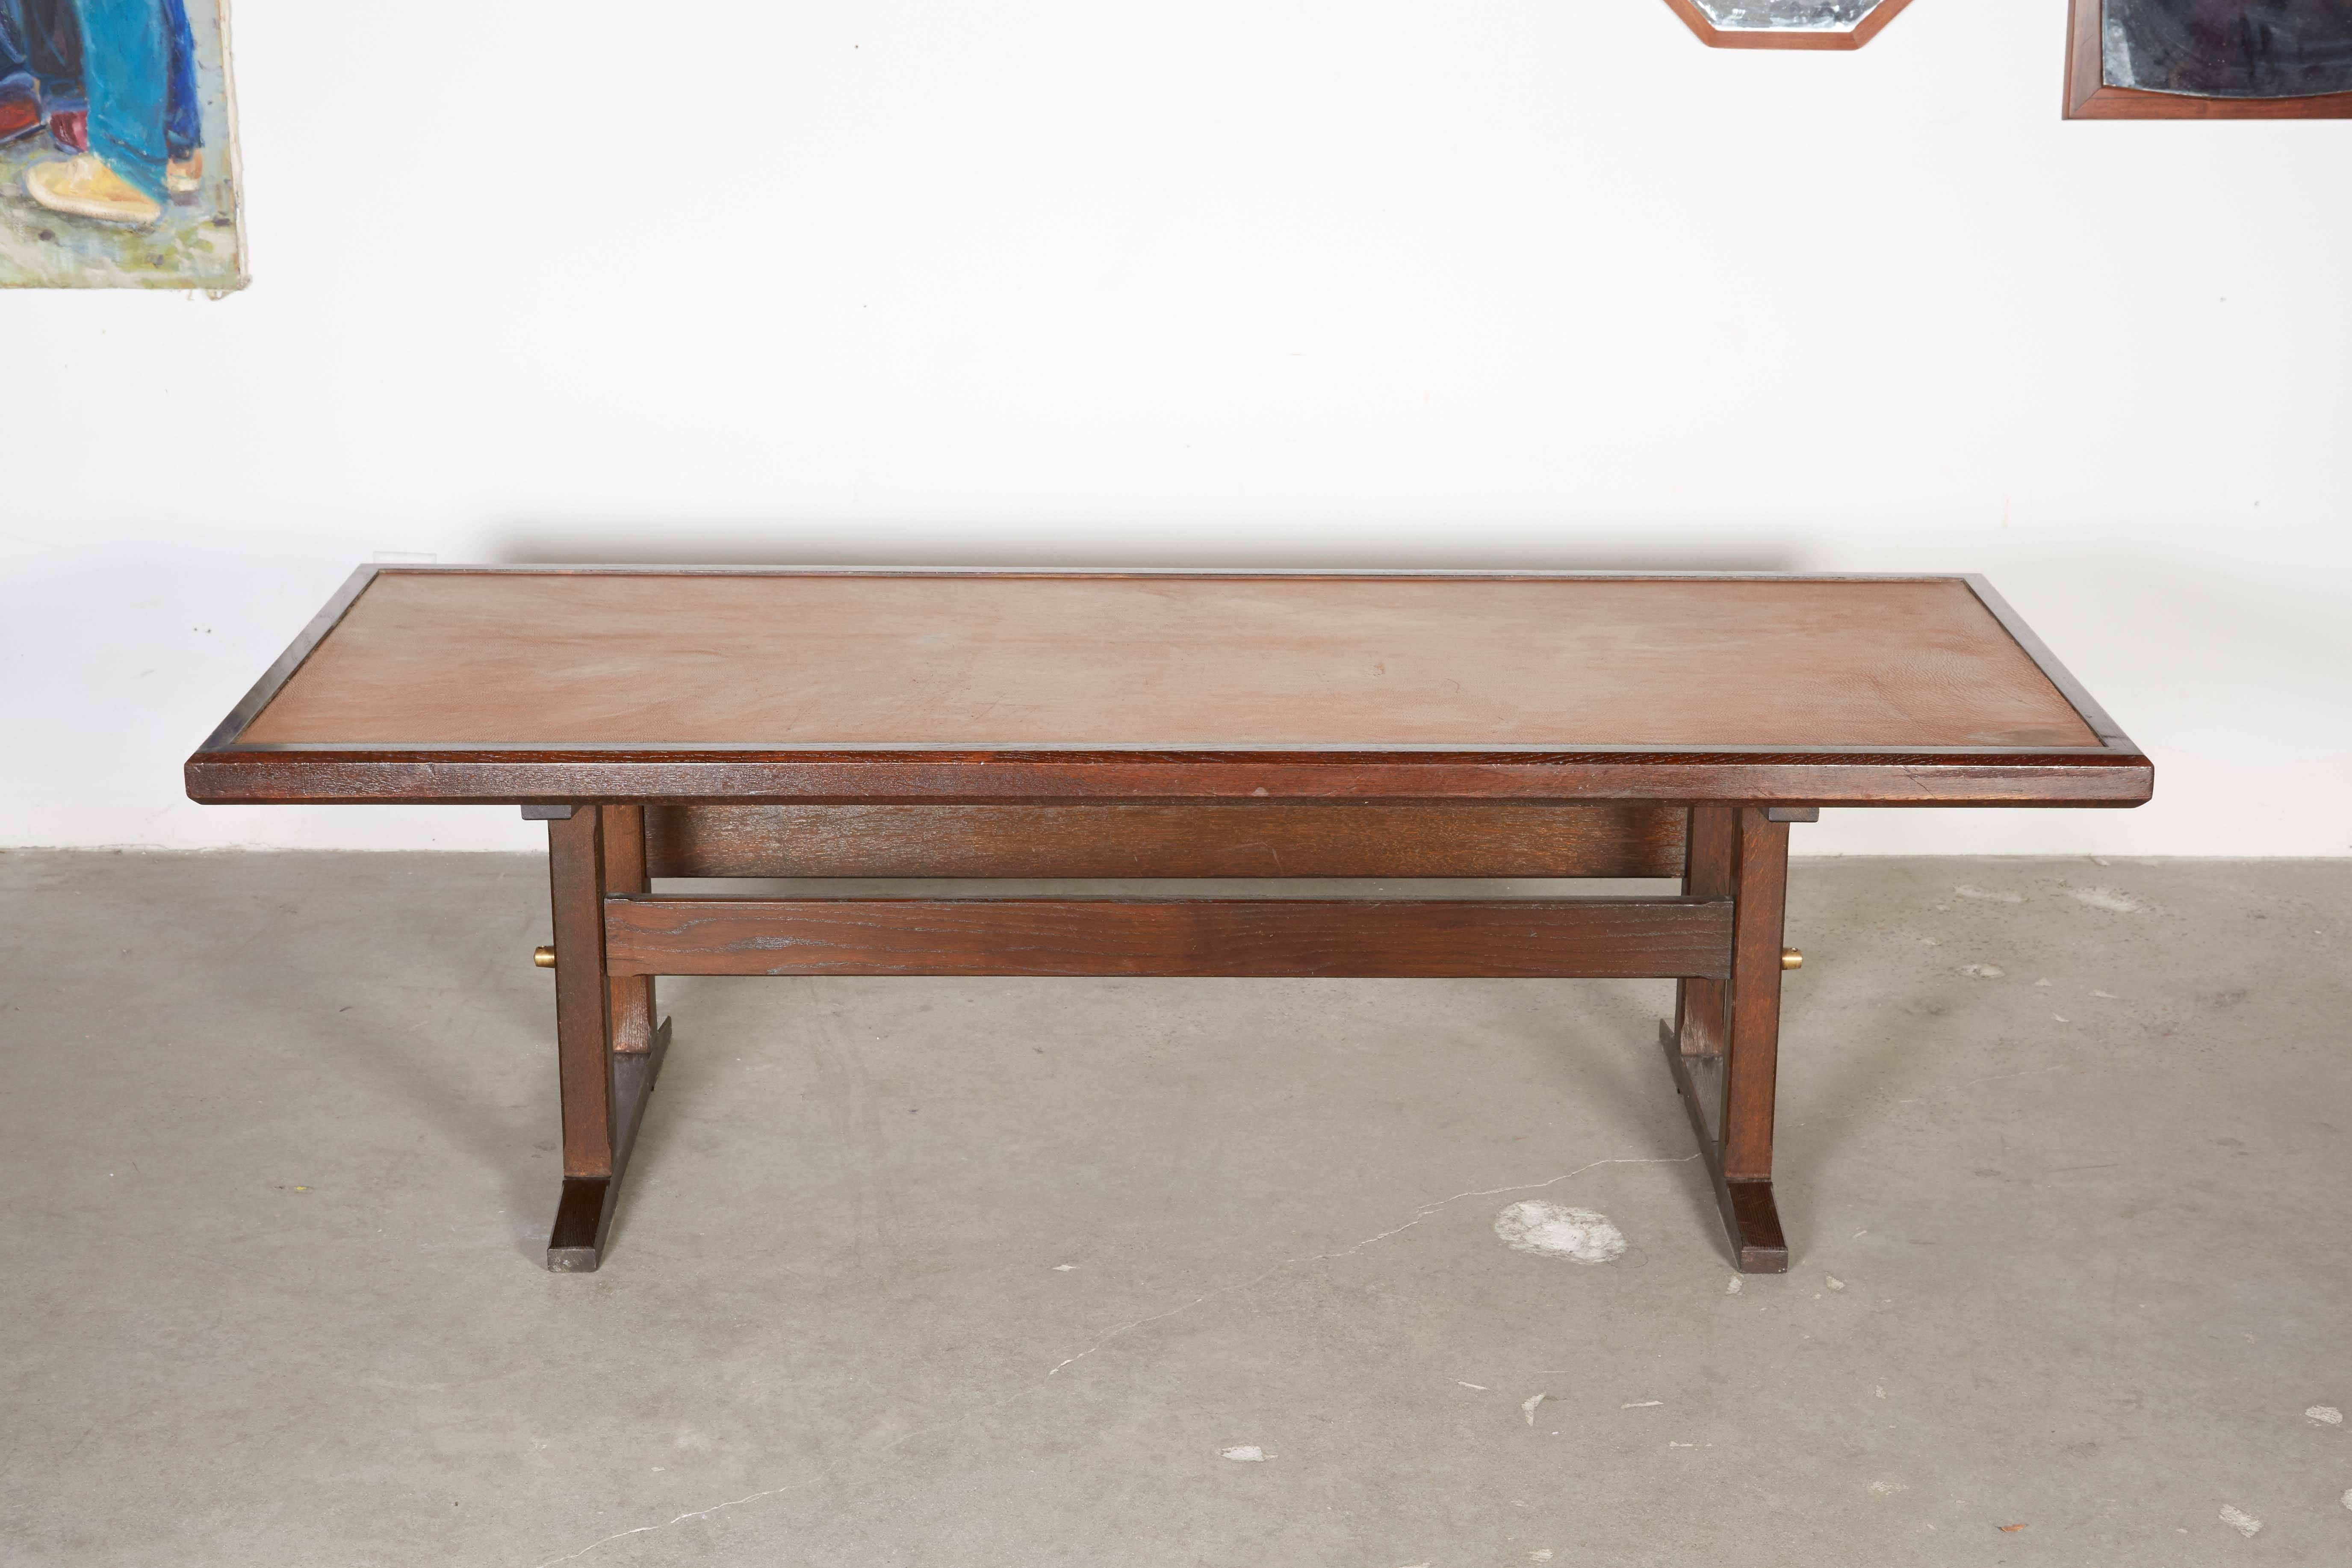 Danish 1960s Jens Quistgaard Coffee Table

This oak coffee table is in excellent condition. The leather covered top comes off for easy shipping. Elegant, sleek, and timeless. The leather has slight age that goes along with regular use. Ready for